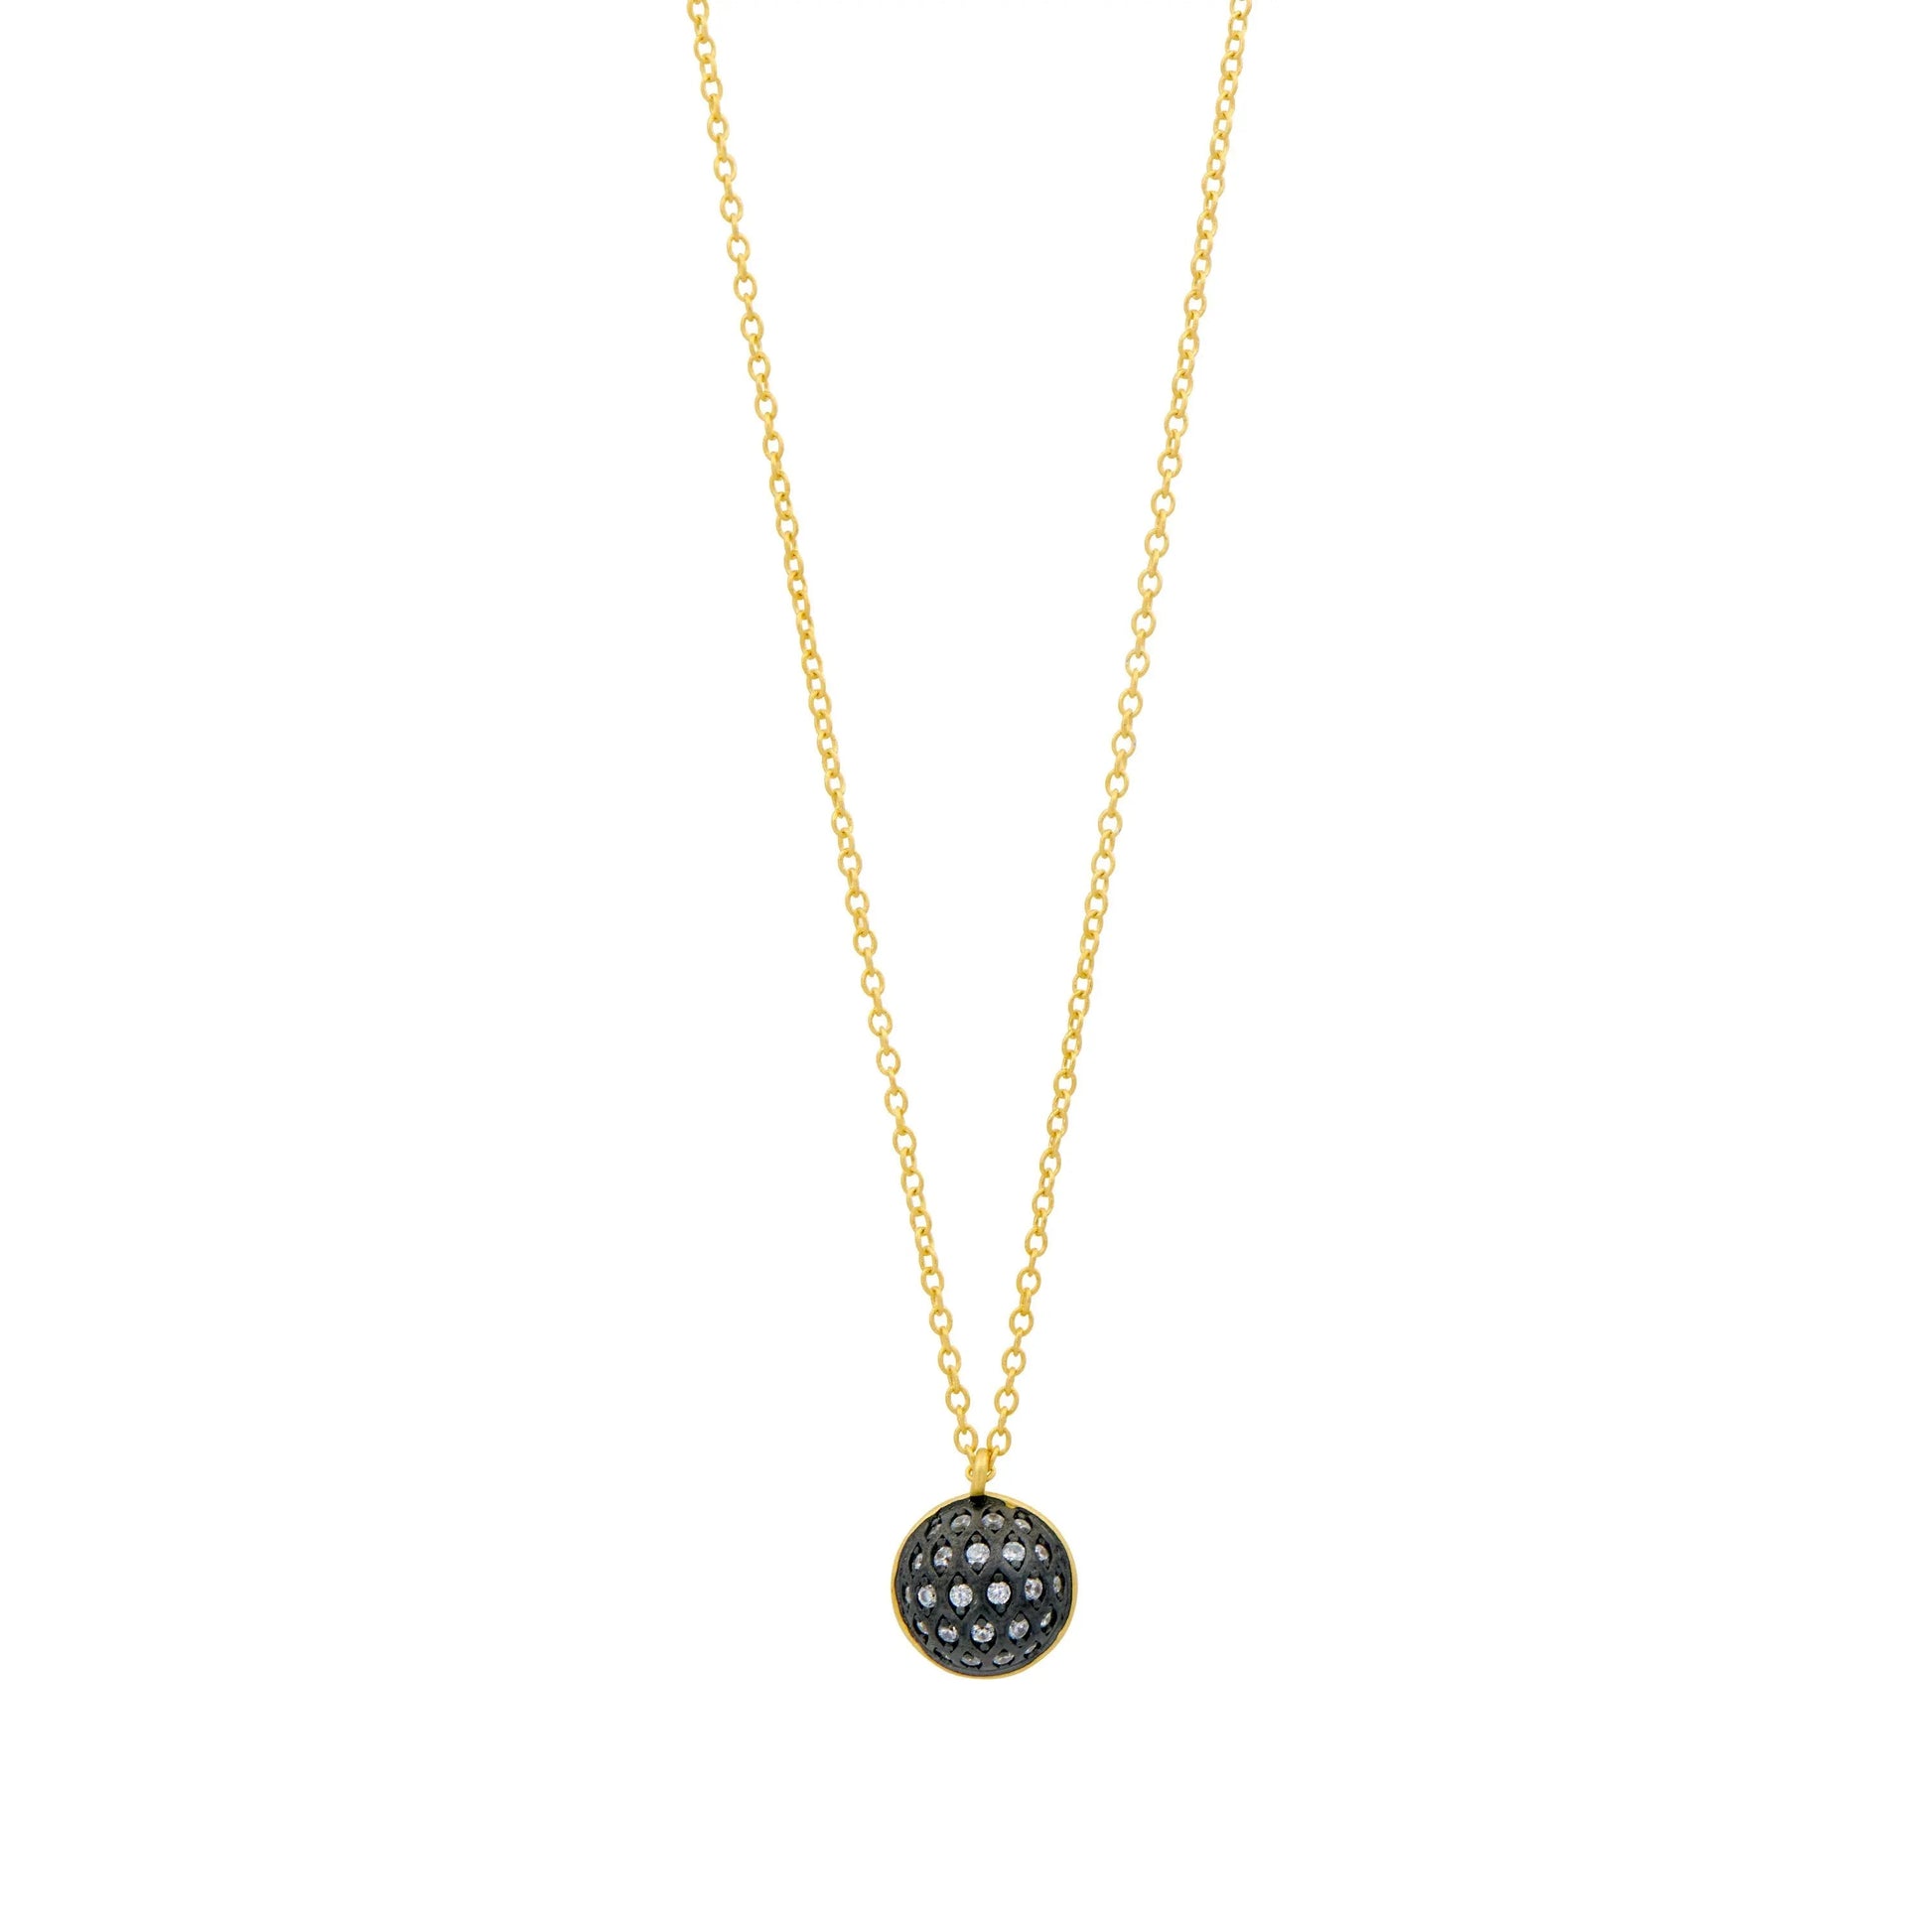 GoldBlack Brooklyn in Bloom Small Pendant Armor of Hope NECKLACE